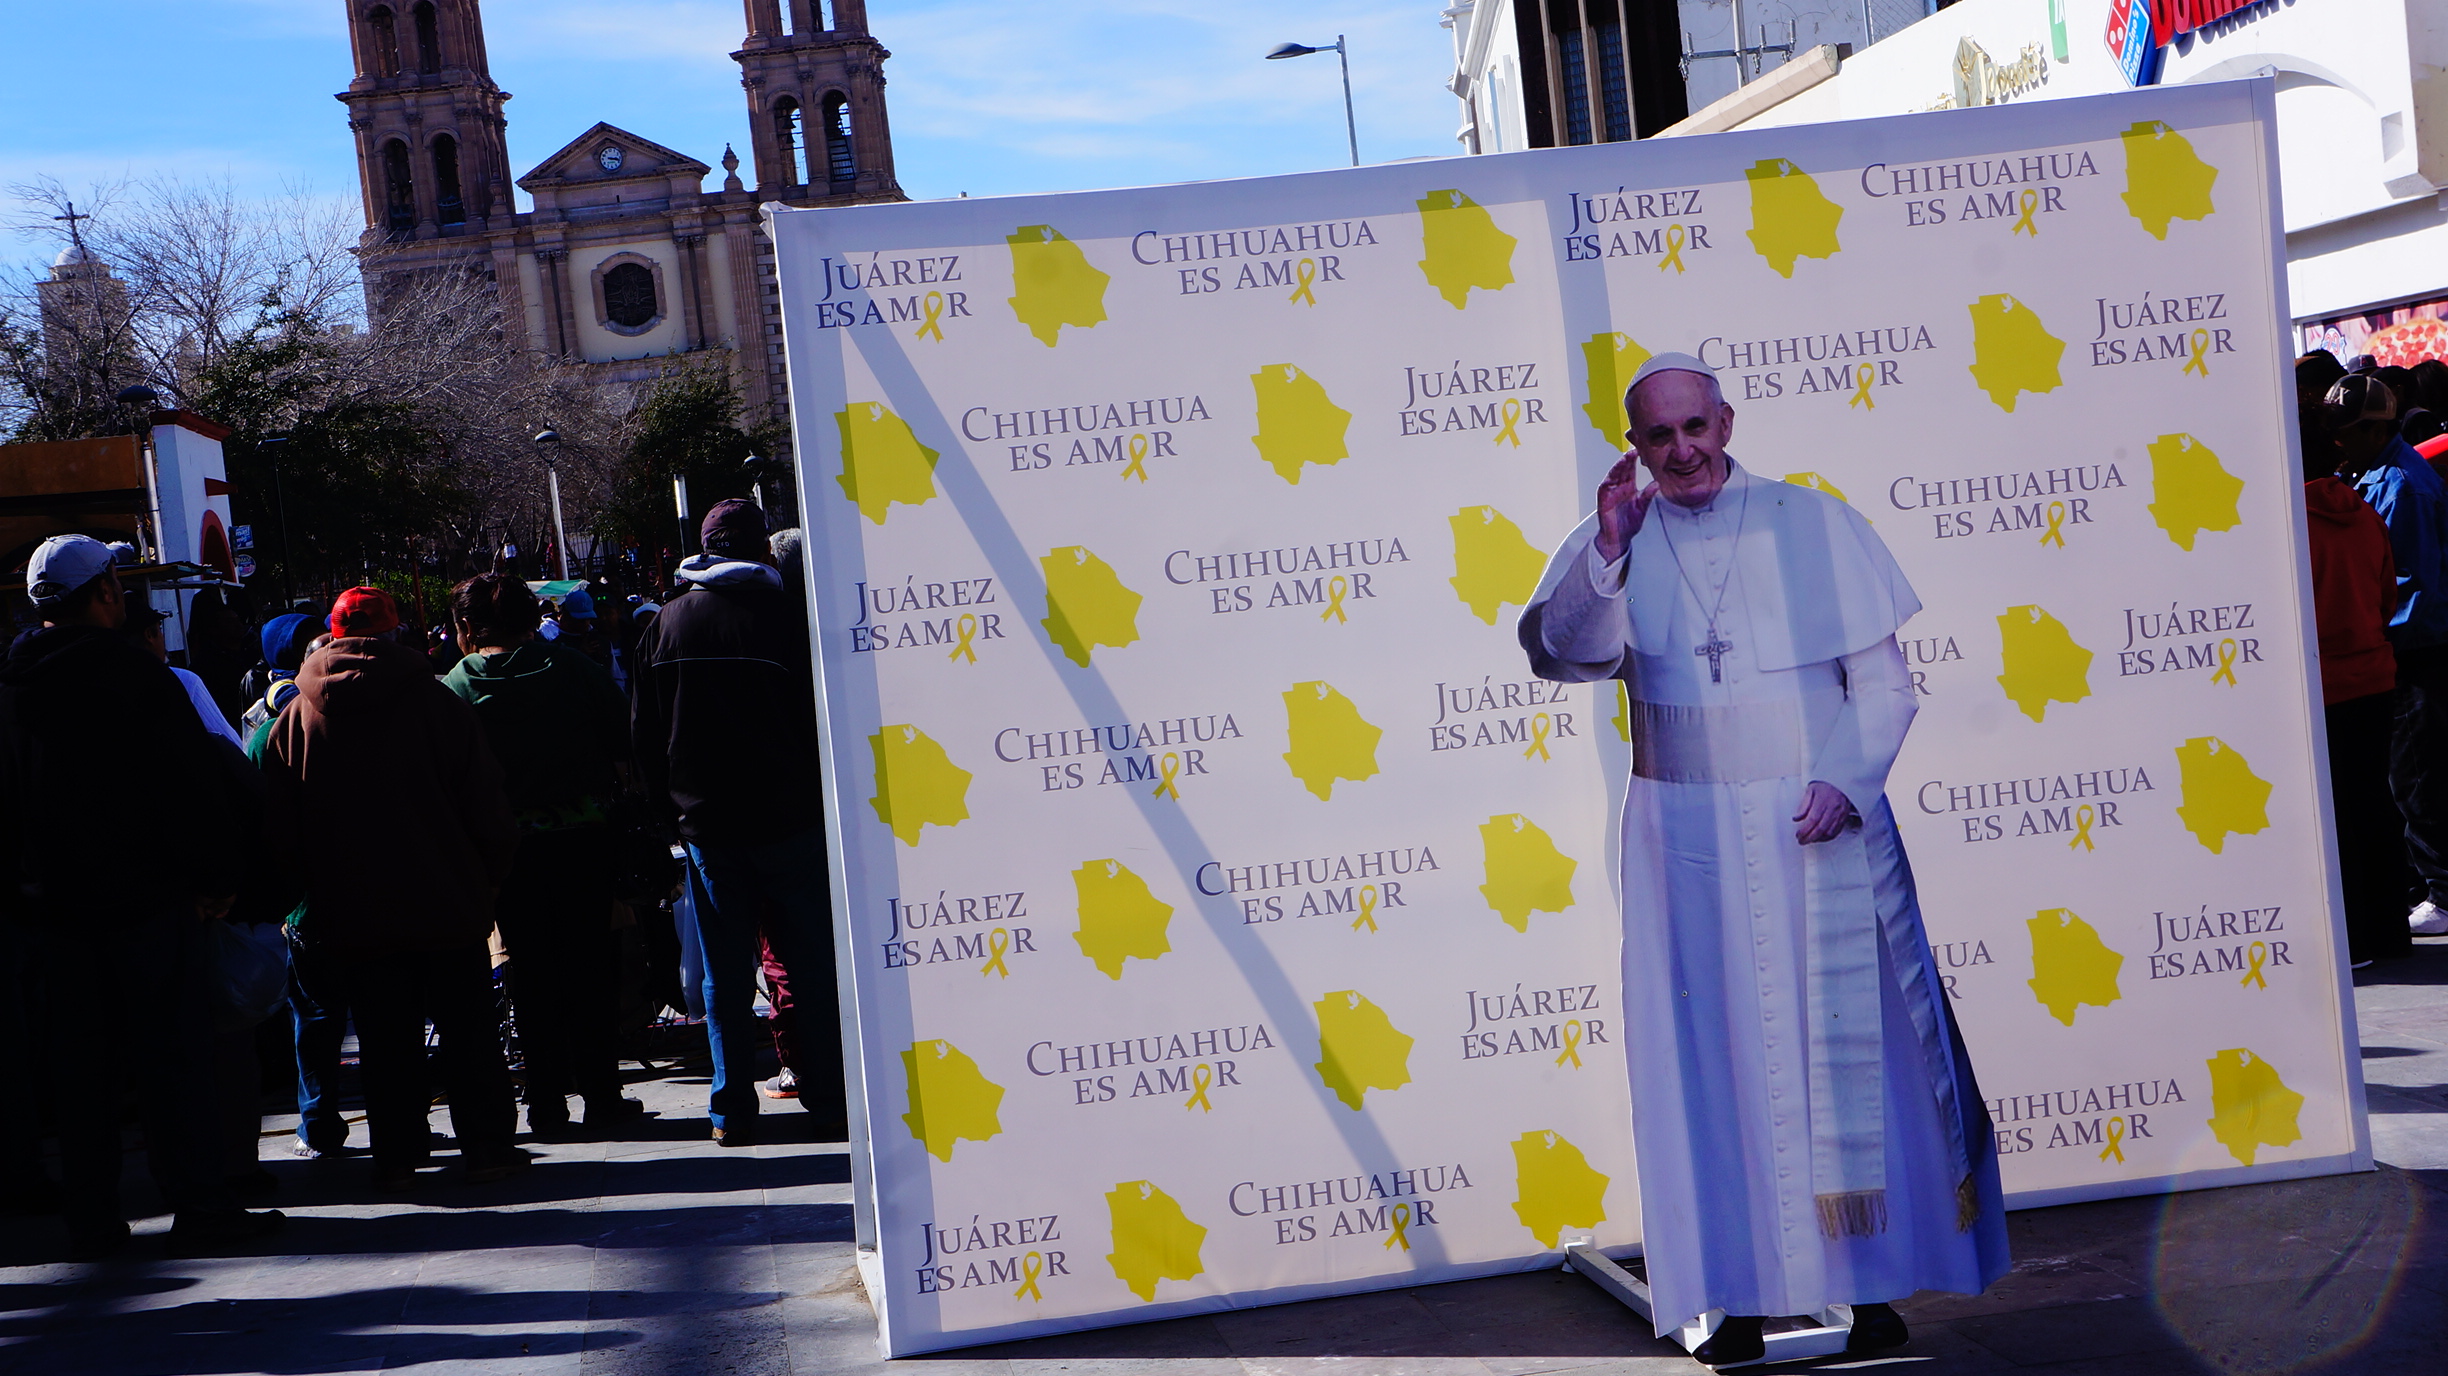 In the leadup to Pope Francis's visit to Juárez, signs and billboards welcome him with slogans like, 'Chihuahua is love.' (Kevin Lees)